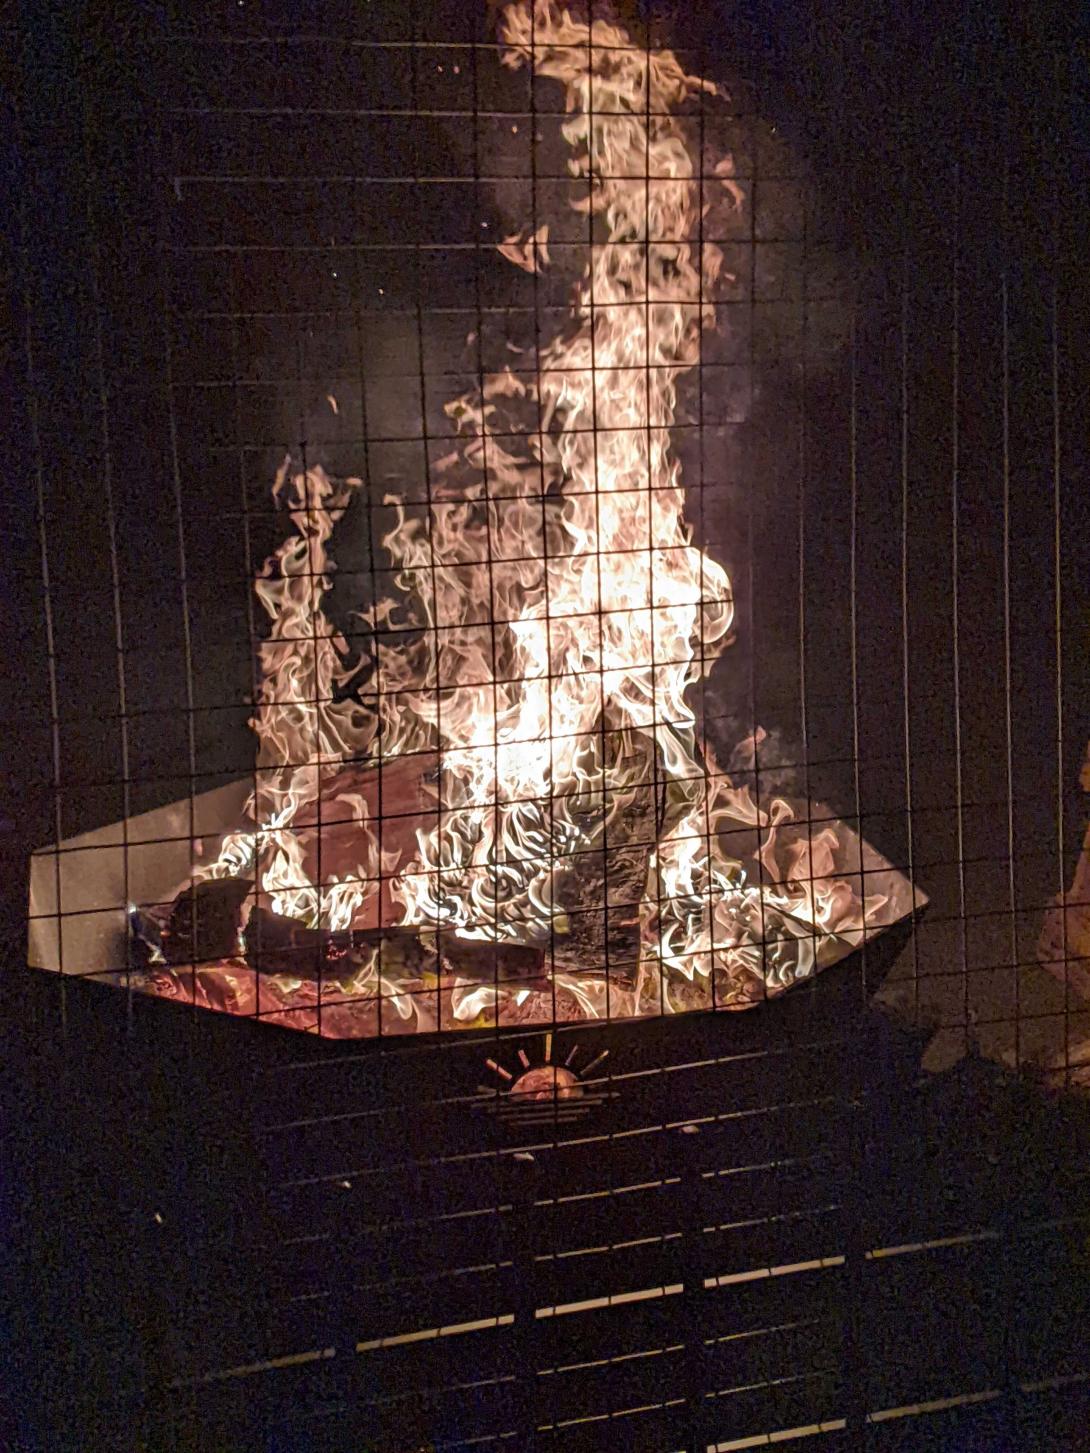 Fire in a fire bowl, when I burned my mother's ridiculous badframe in glorious conflagration of closure.